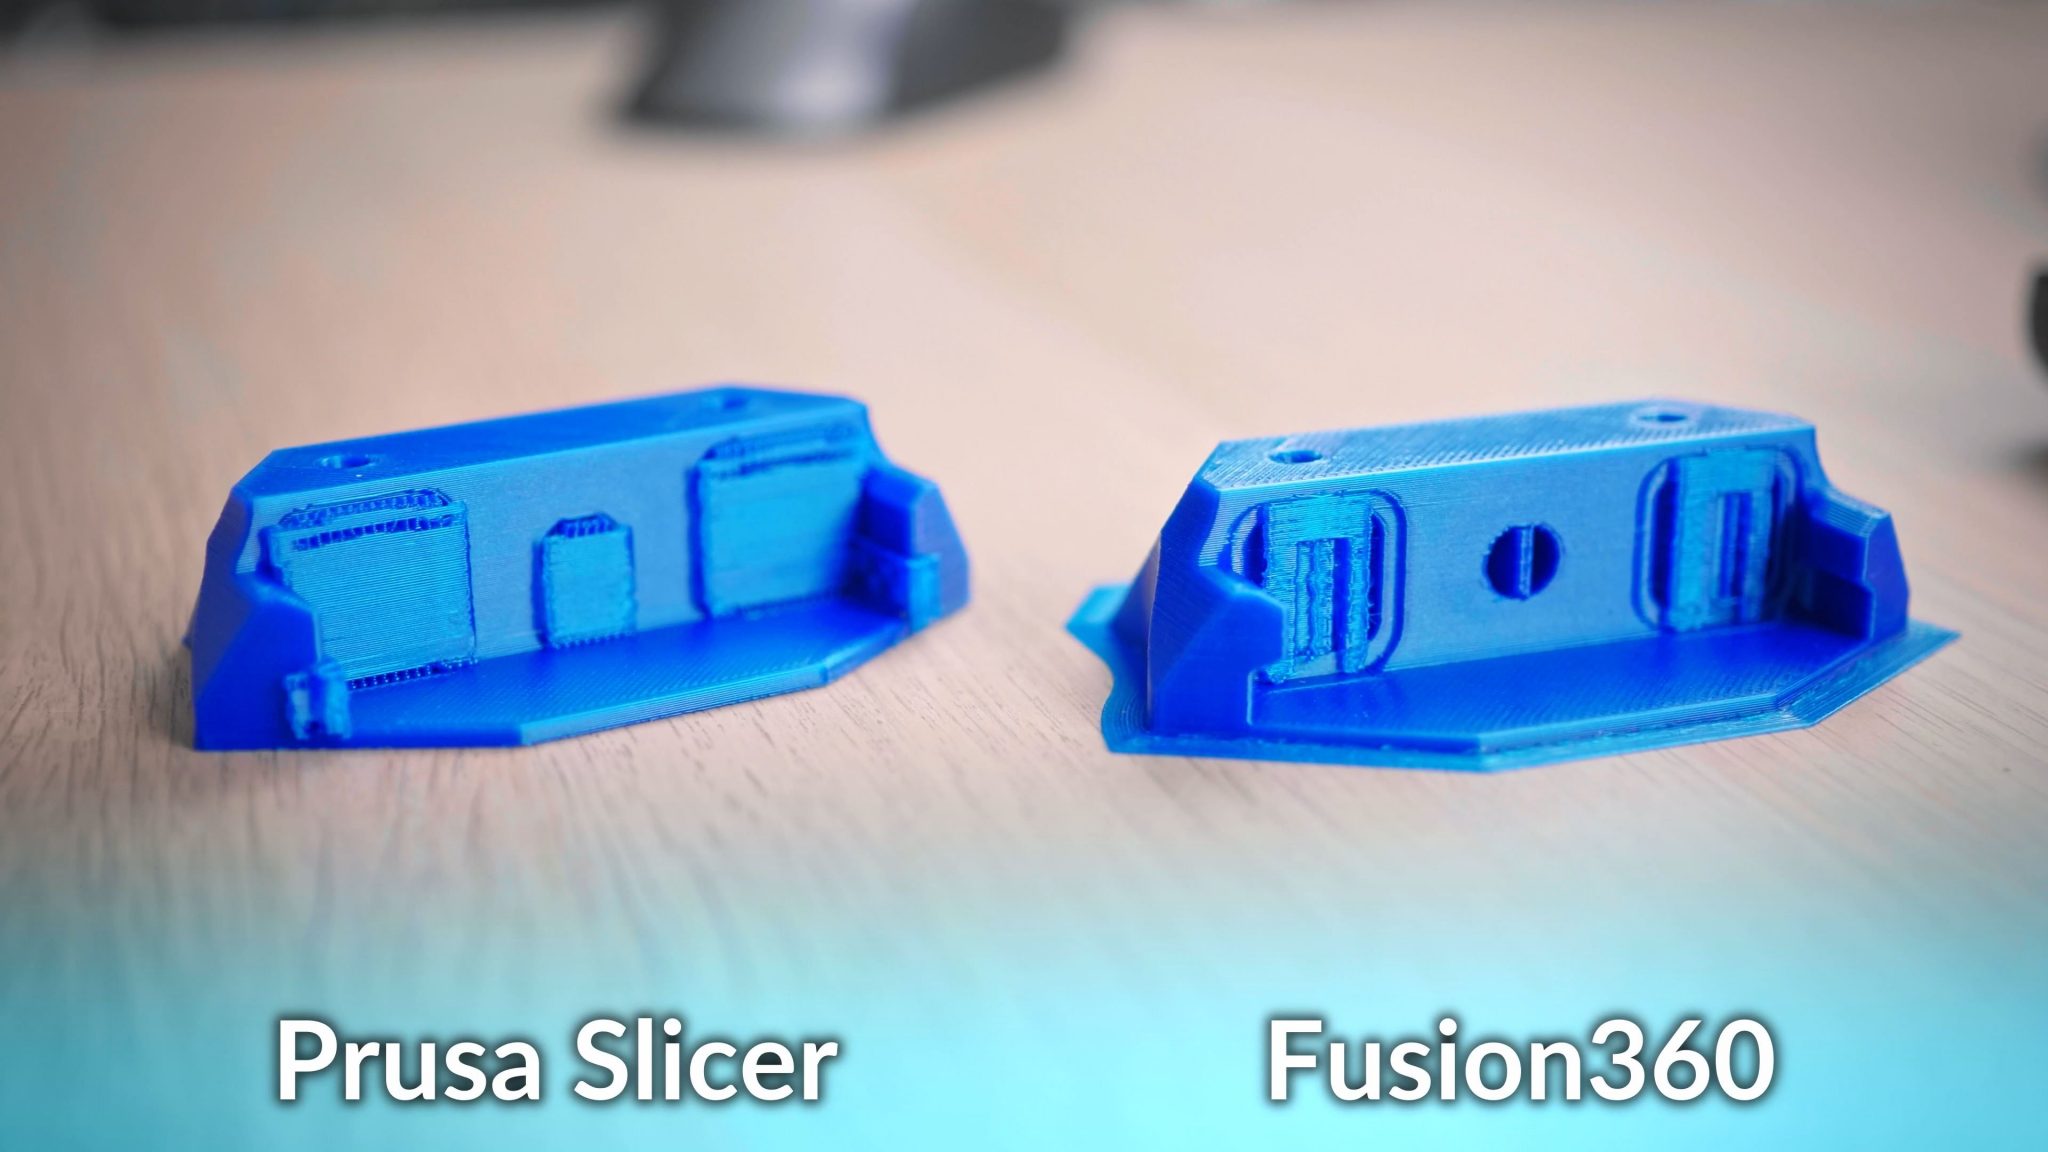 You can now 3D print your parts with Fusion360’s new slicer! Is it